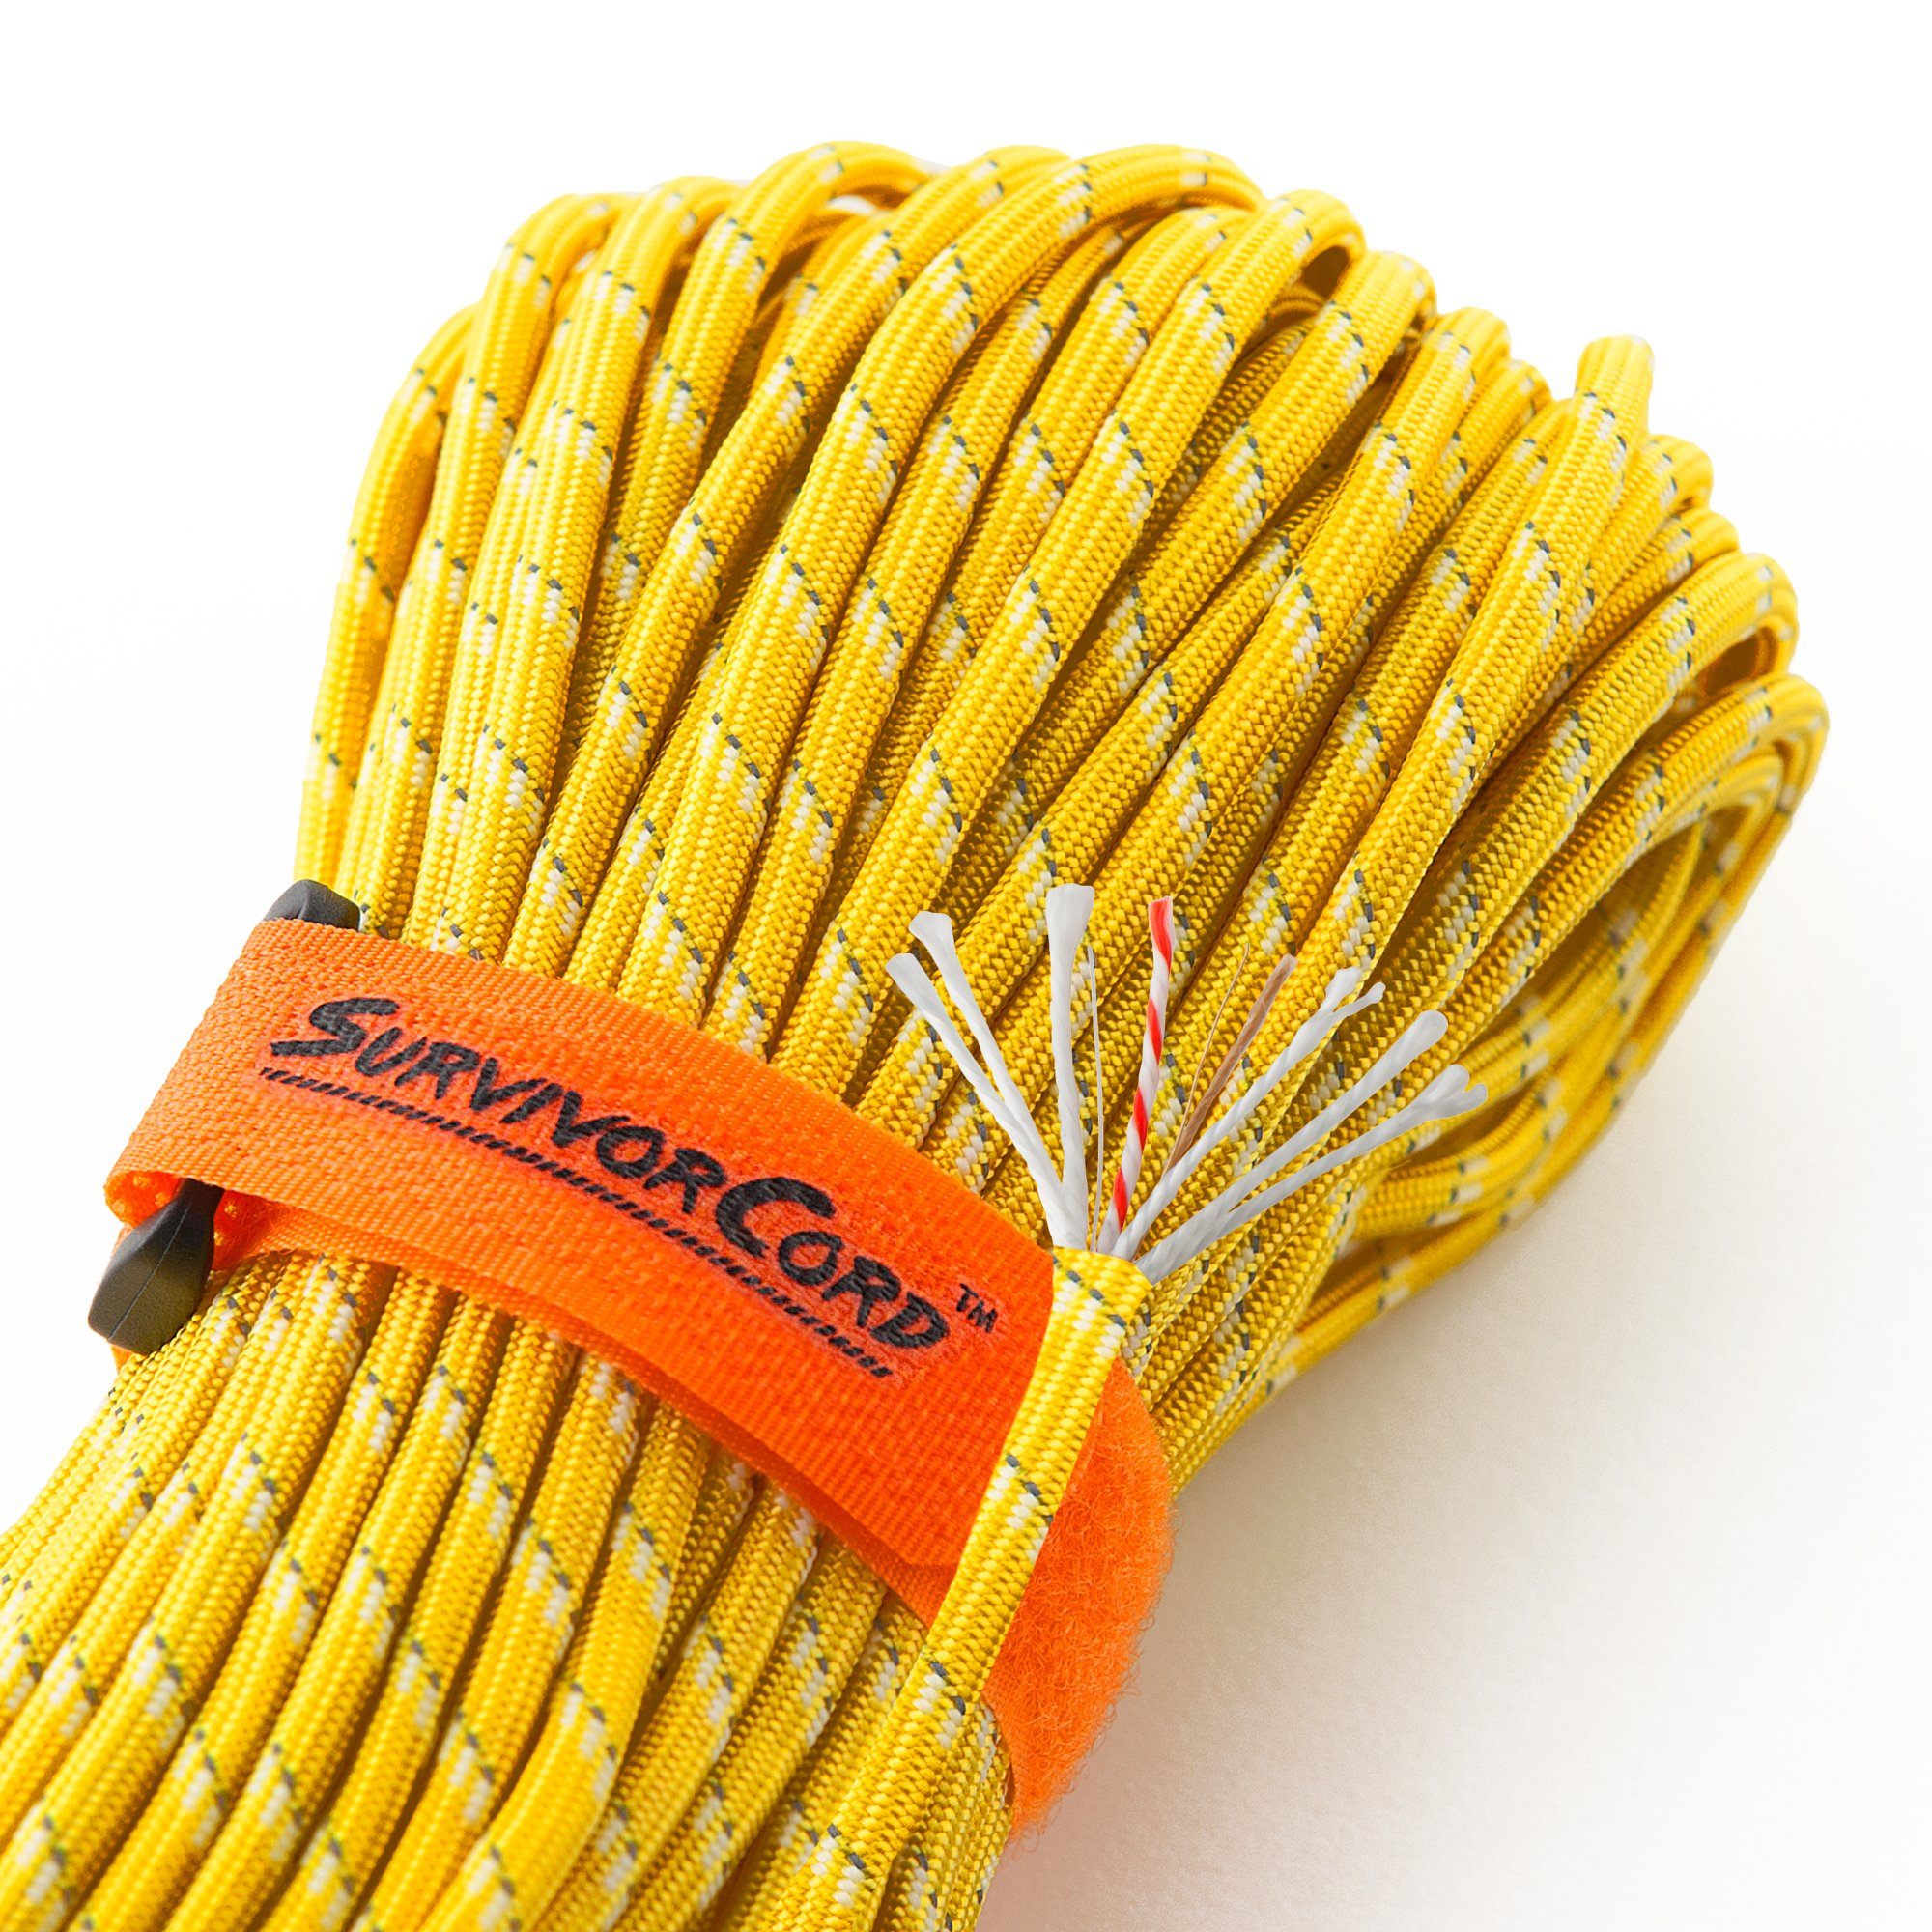 Neon Yellow Paracord Type I ca 2 mm accessory cord